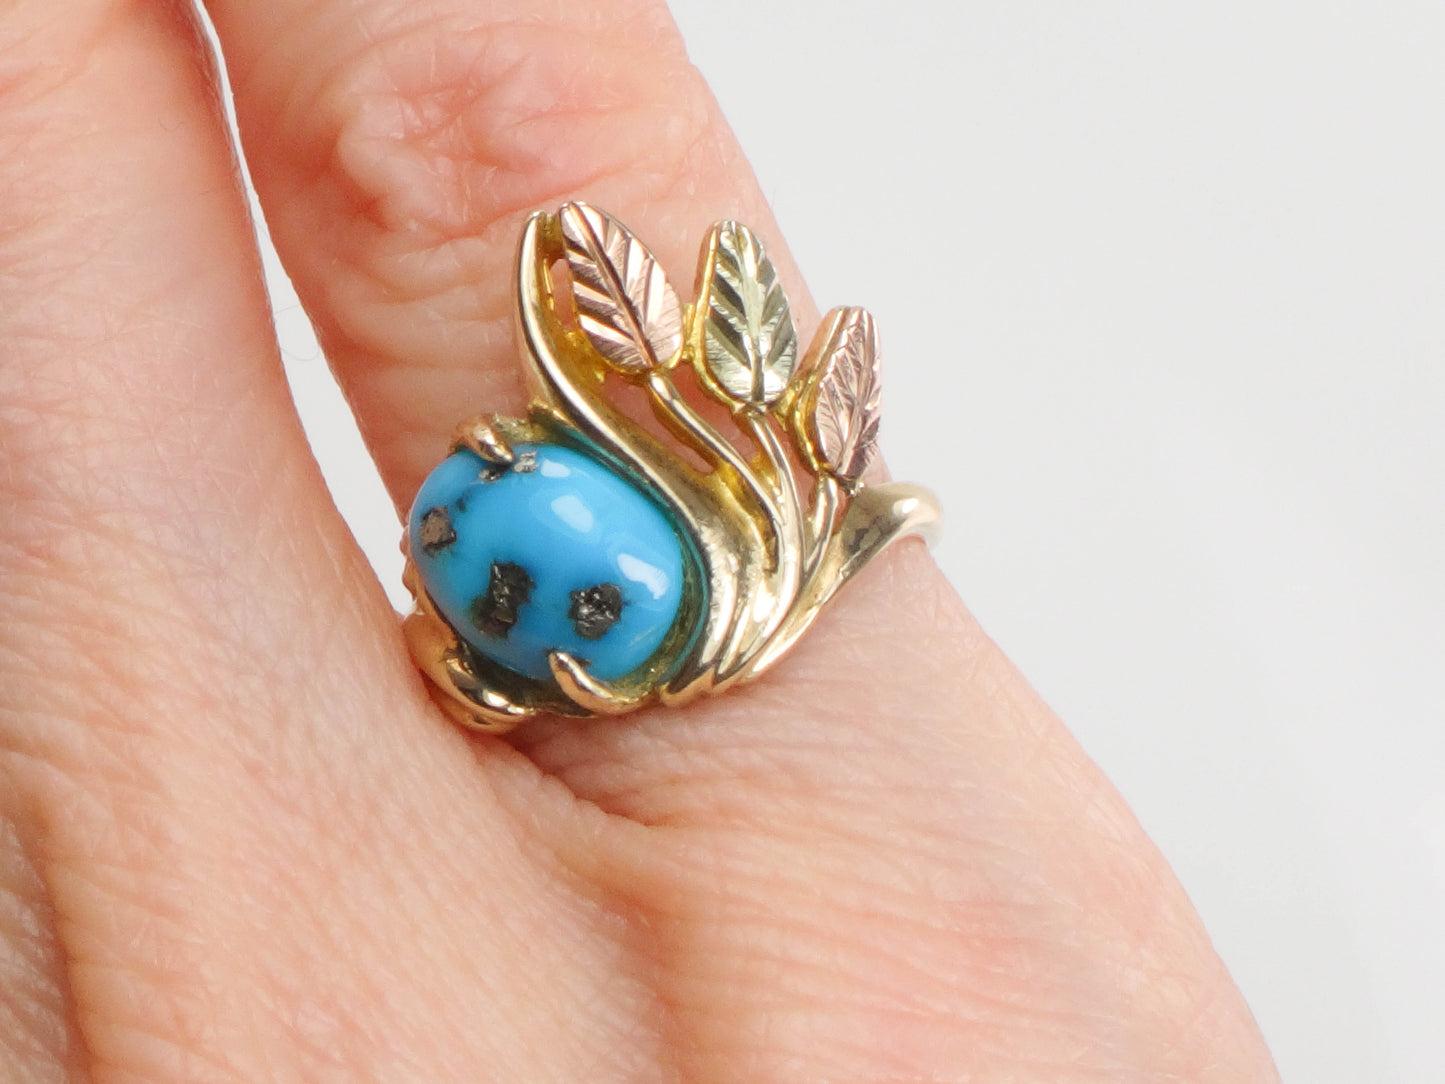 Vintage 10k Yellow and Rose Gold Turquoise Ring with Leaves and Berries, Size 4